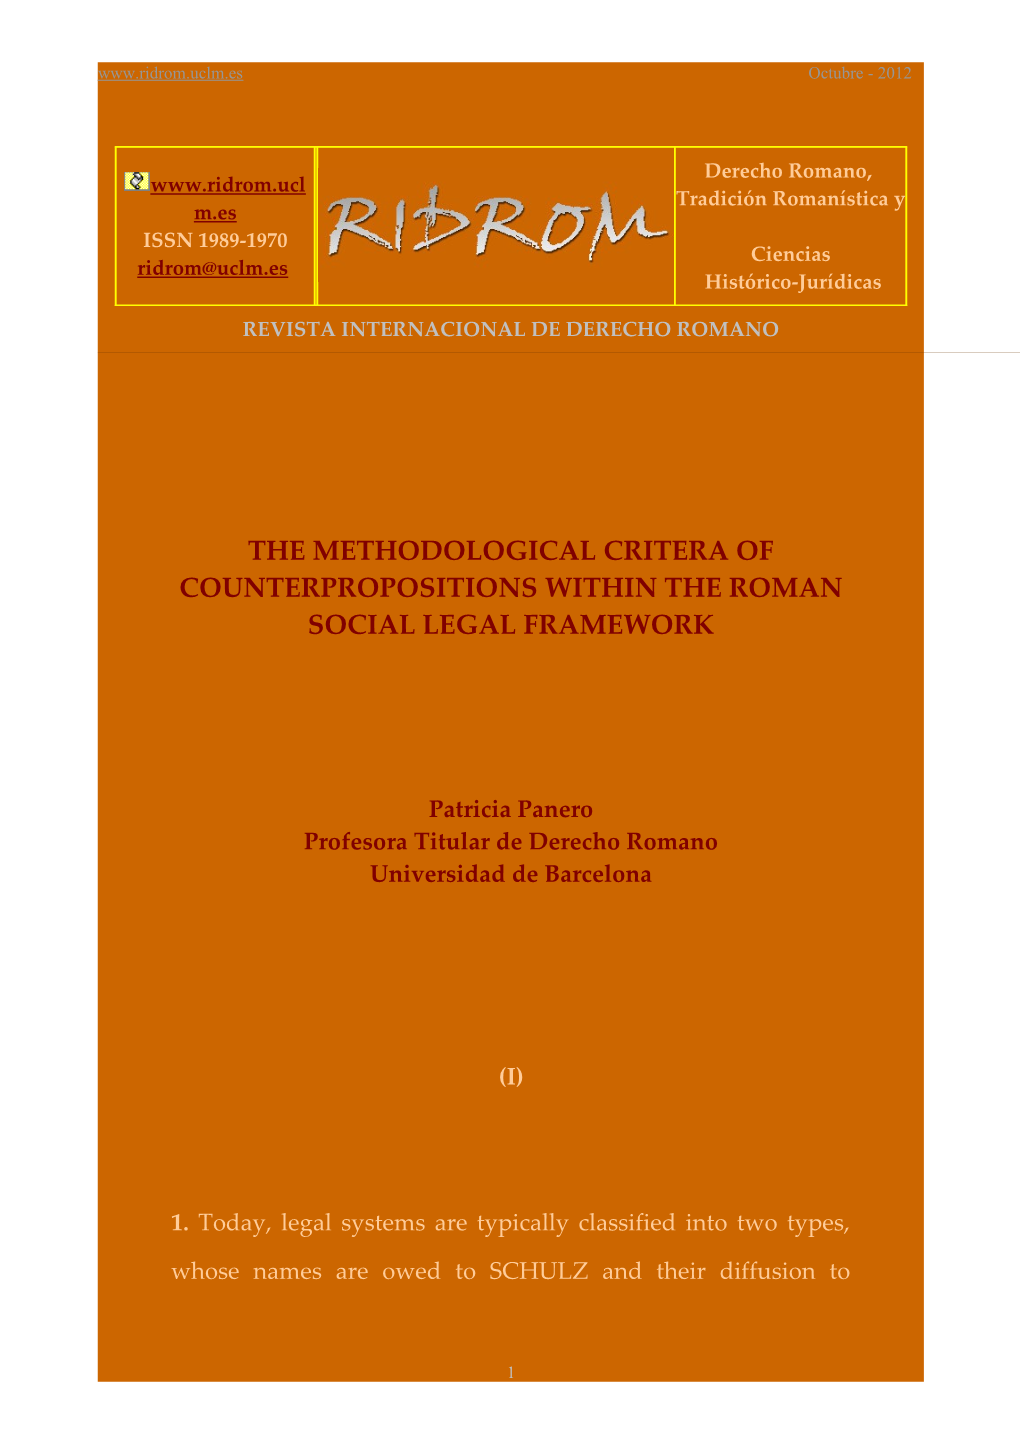 The Methodological Criteria of Counterpropositions Within the Roman Social Legal Framework